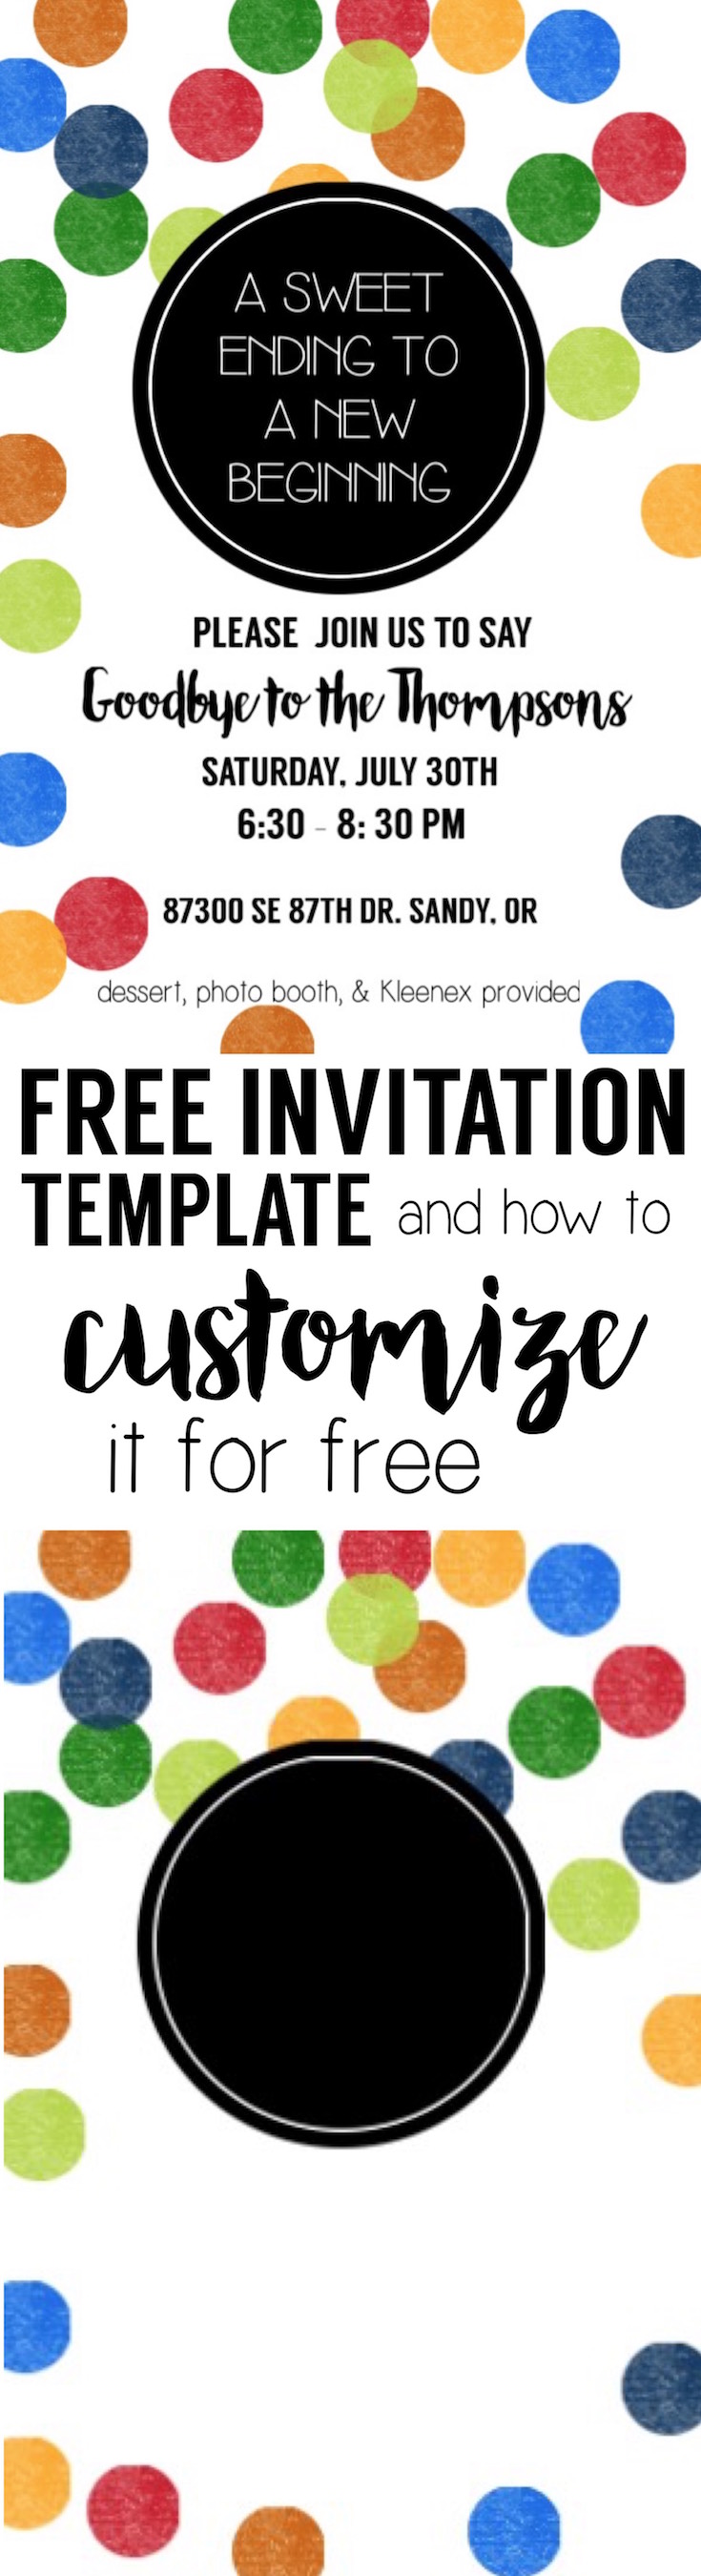 Colorful Party Invitation Free Template. Customize this invite easily with free online software and our tutorial. Cute rainbow color polka dots.